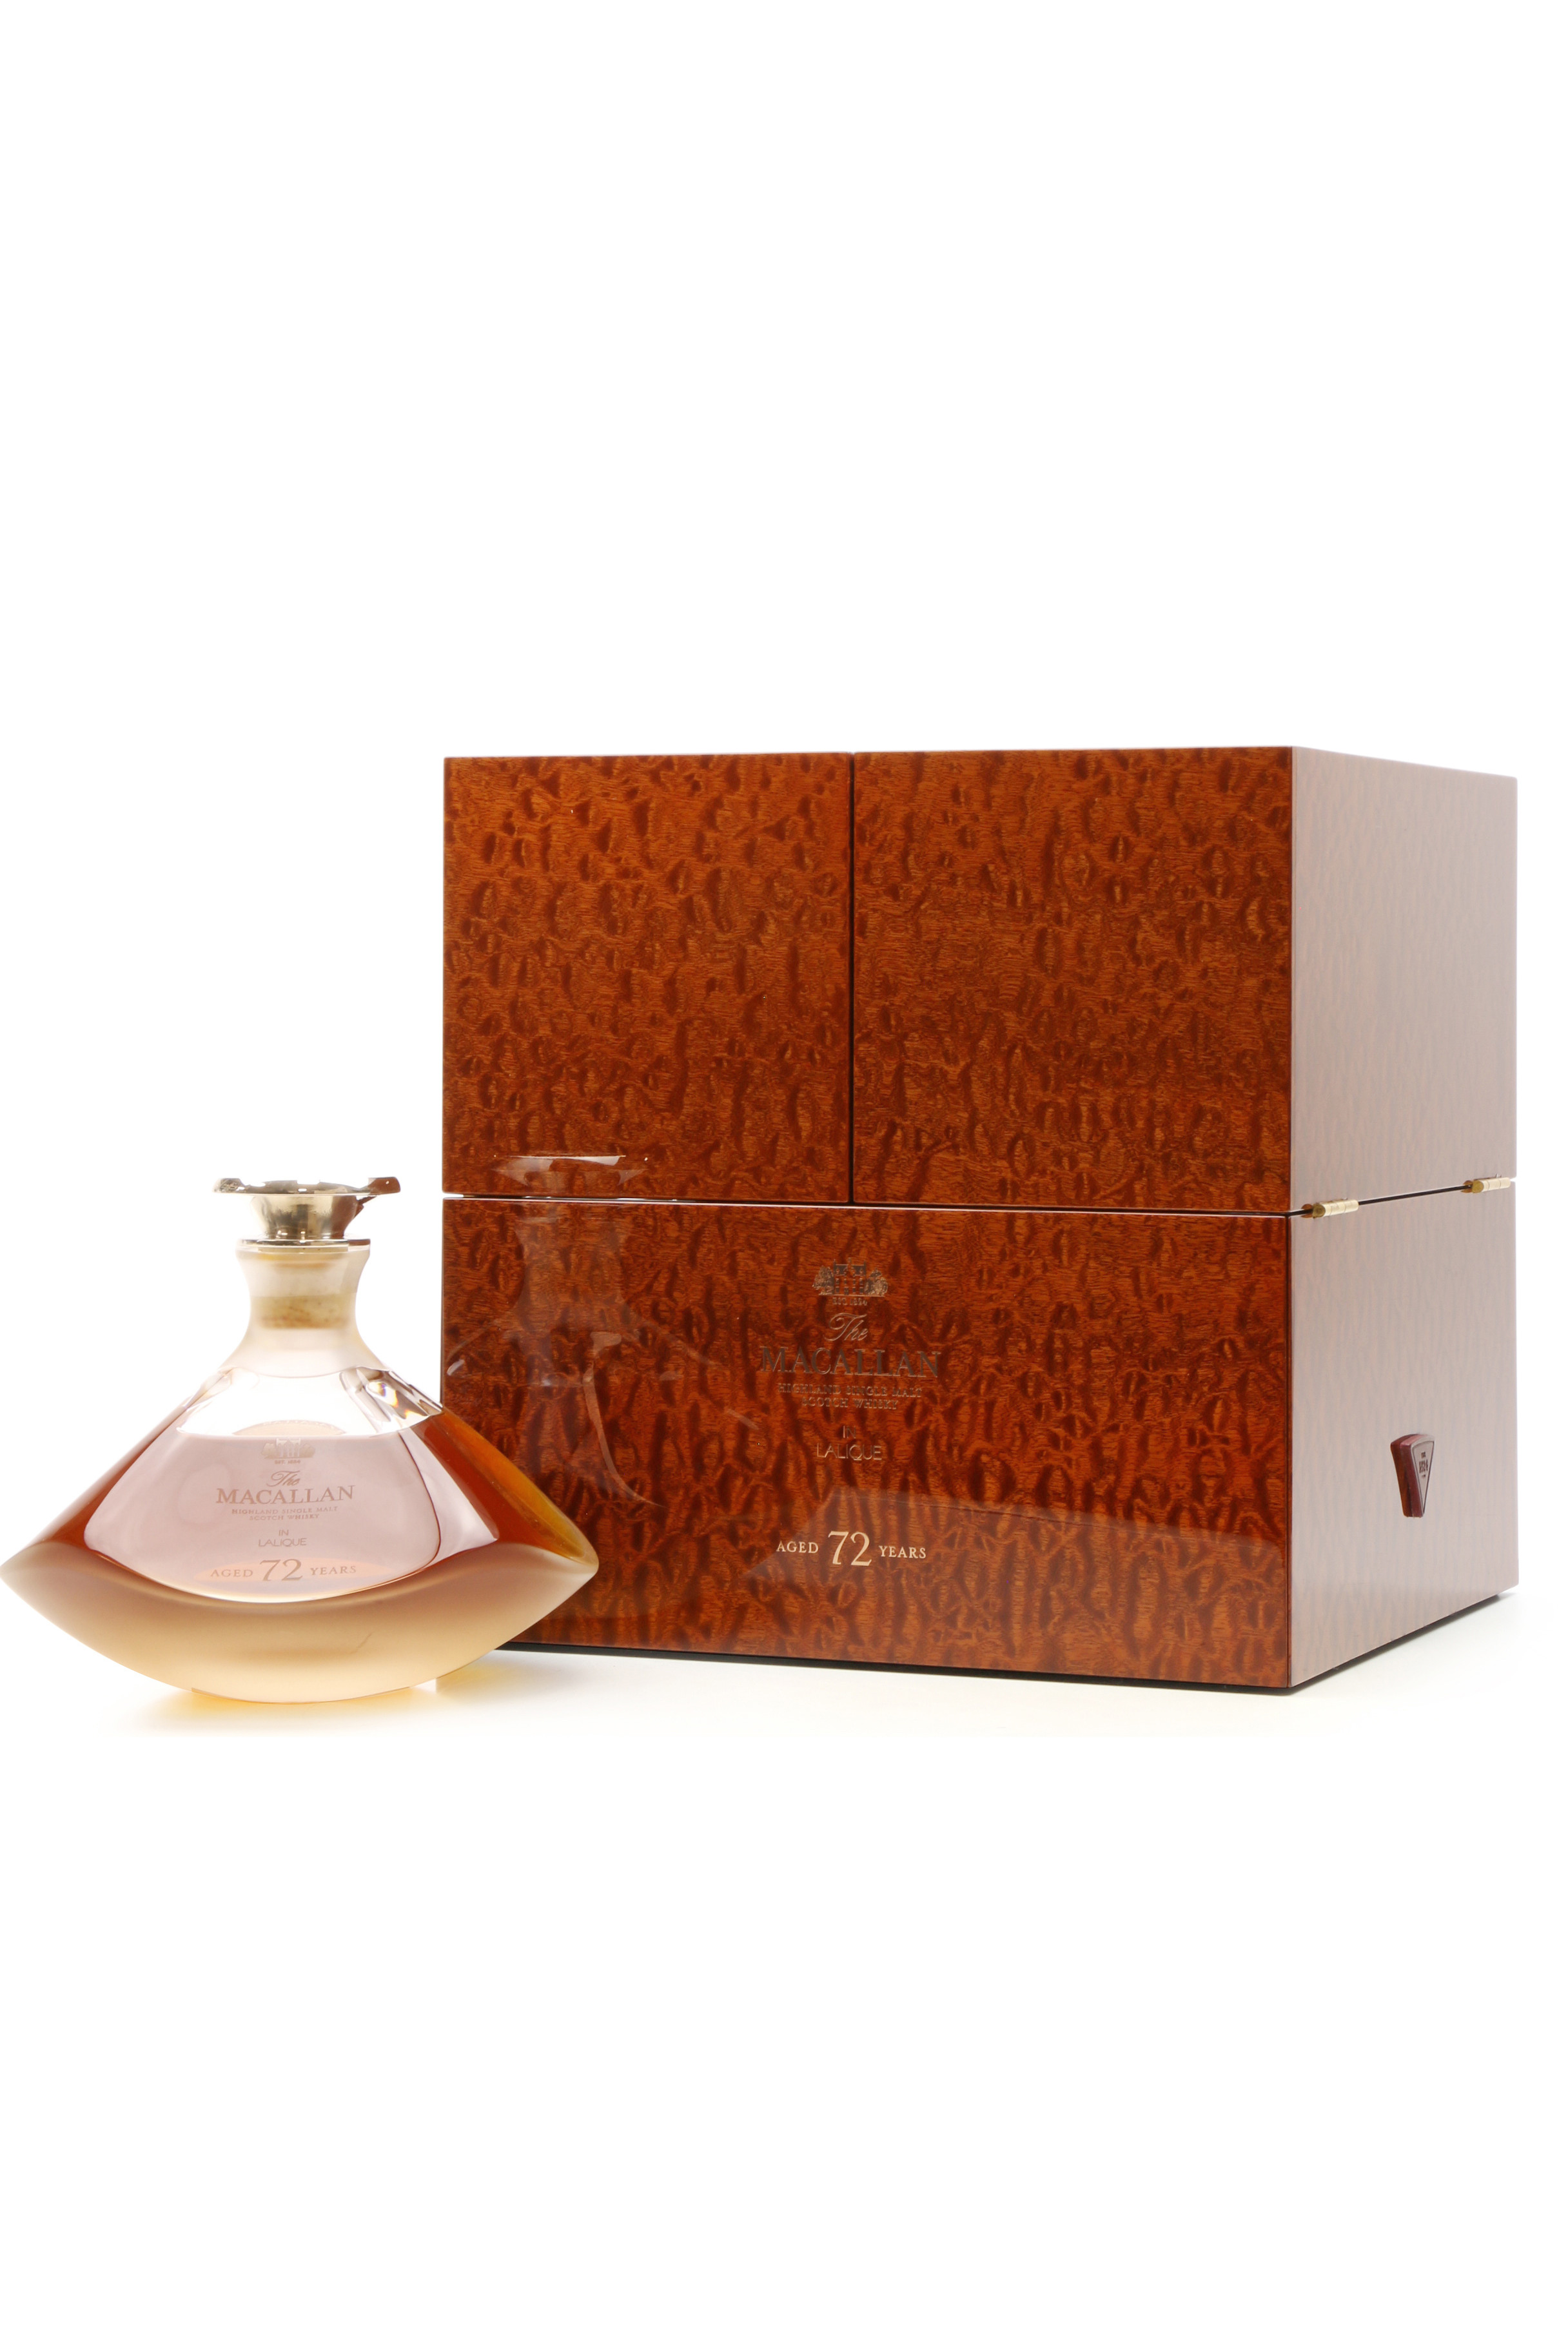 Macallan 72 Years Old 2018 Lalique Genesis Decanter 75cl Just Whisky Auctions